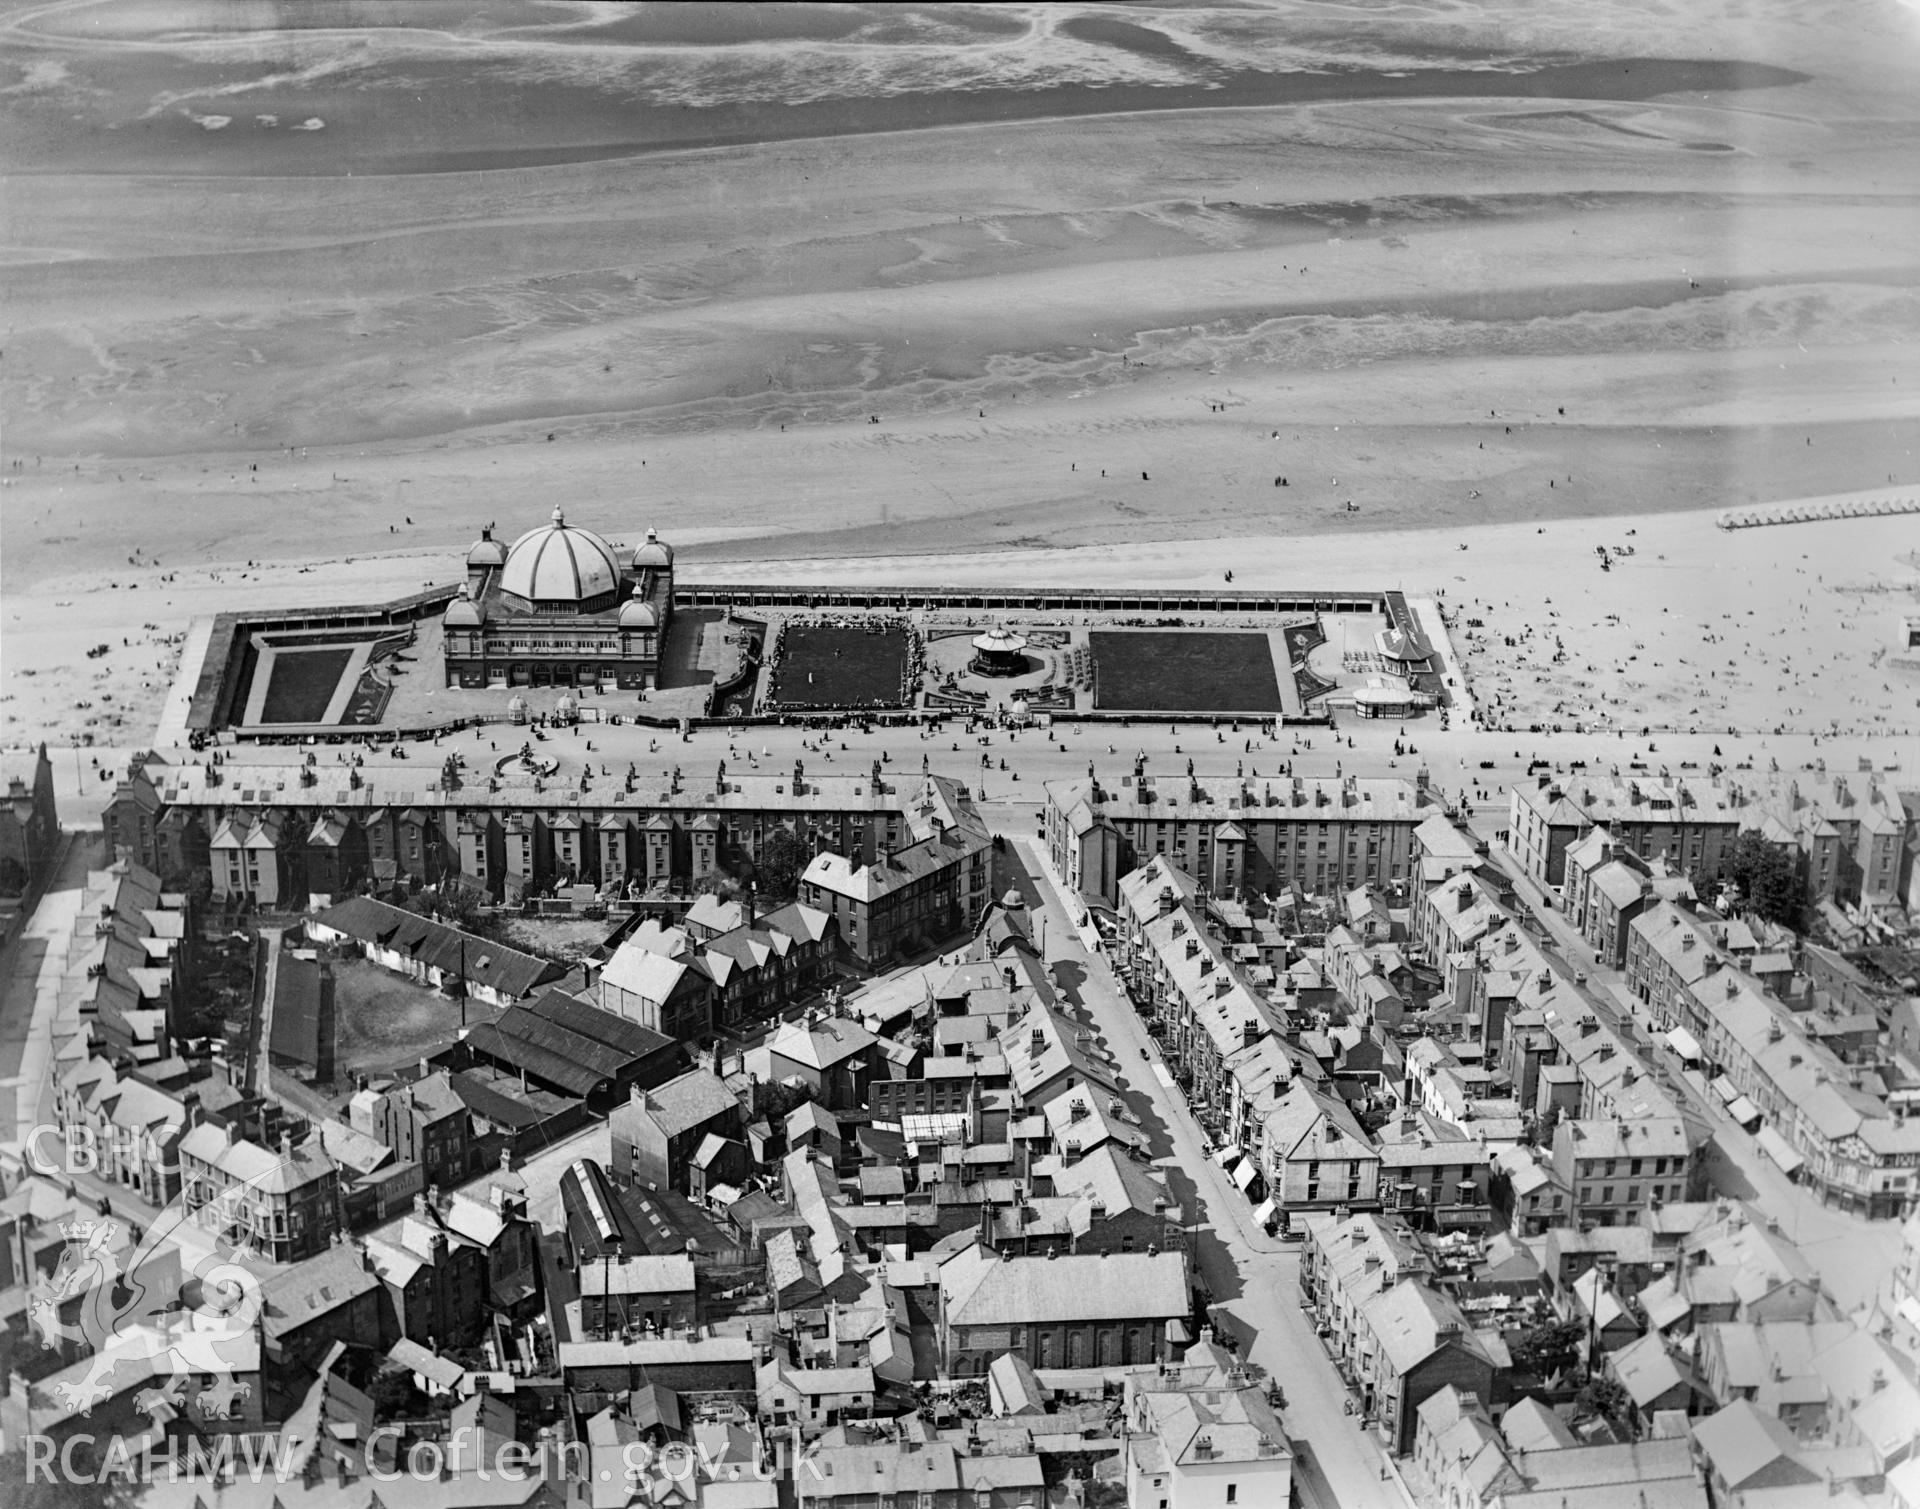 View of Rhyl showing the new pavillion and bandstand, oblique aerial view. 5?x4? black and white glass plate negative.